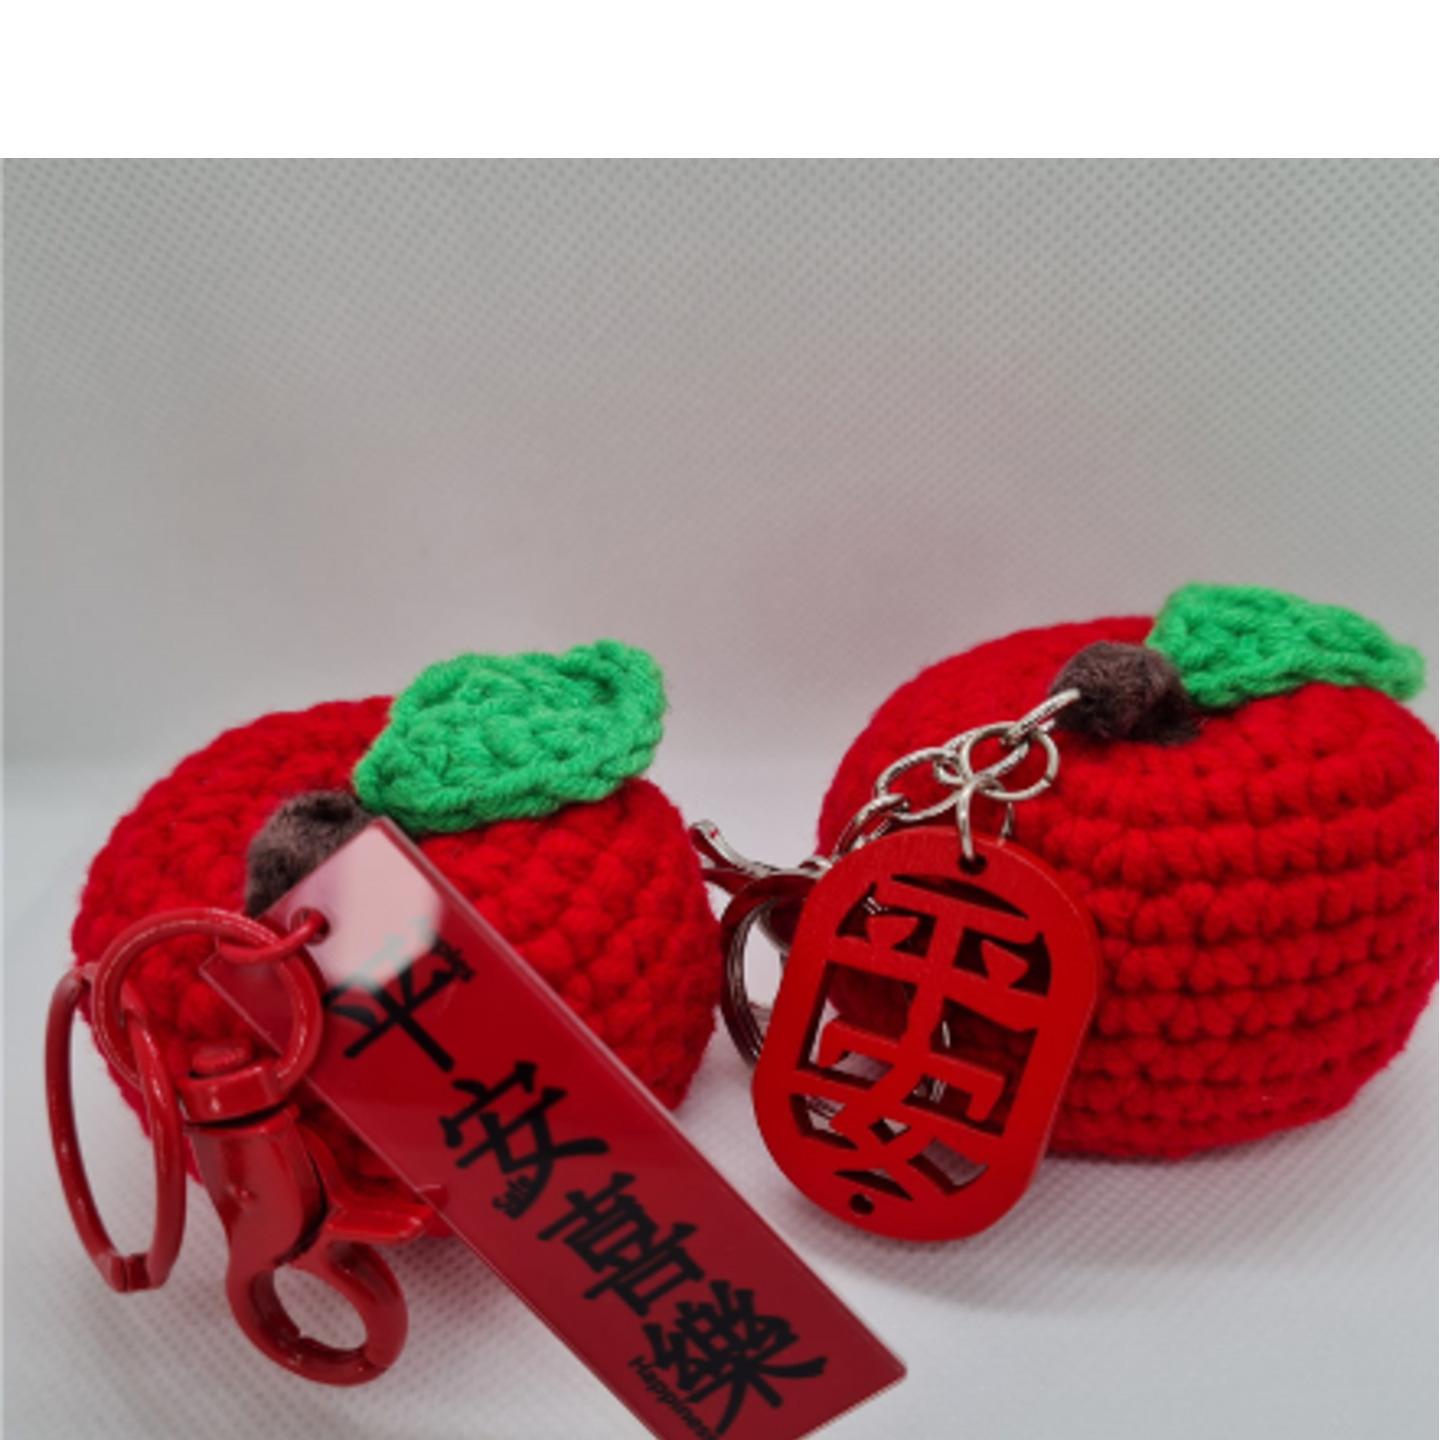 Apple Key Chain with Chinese Word (Red)